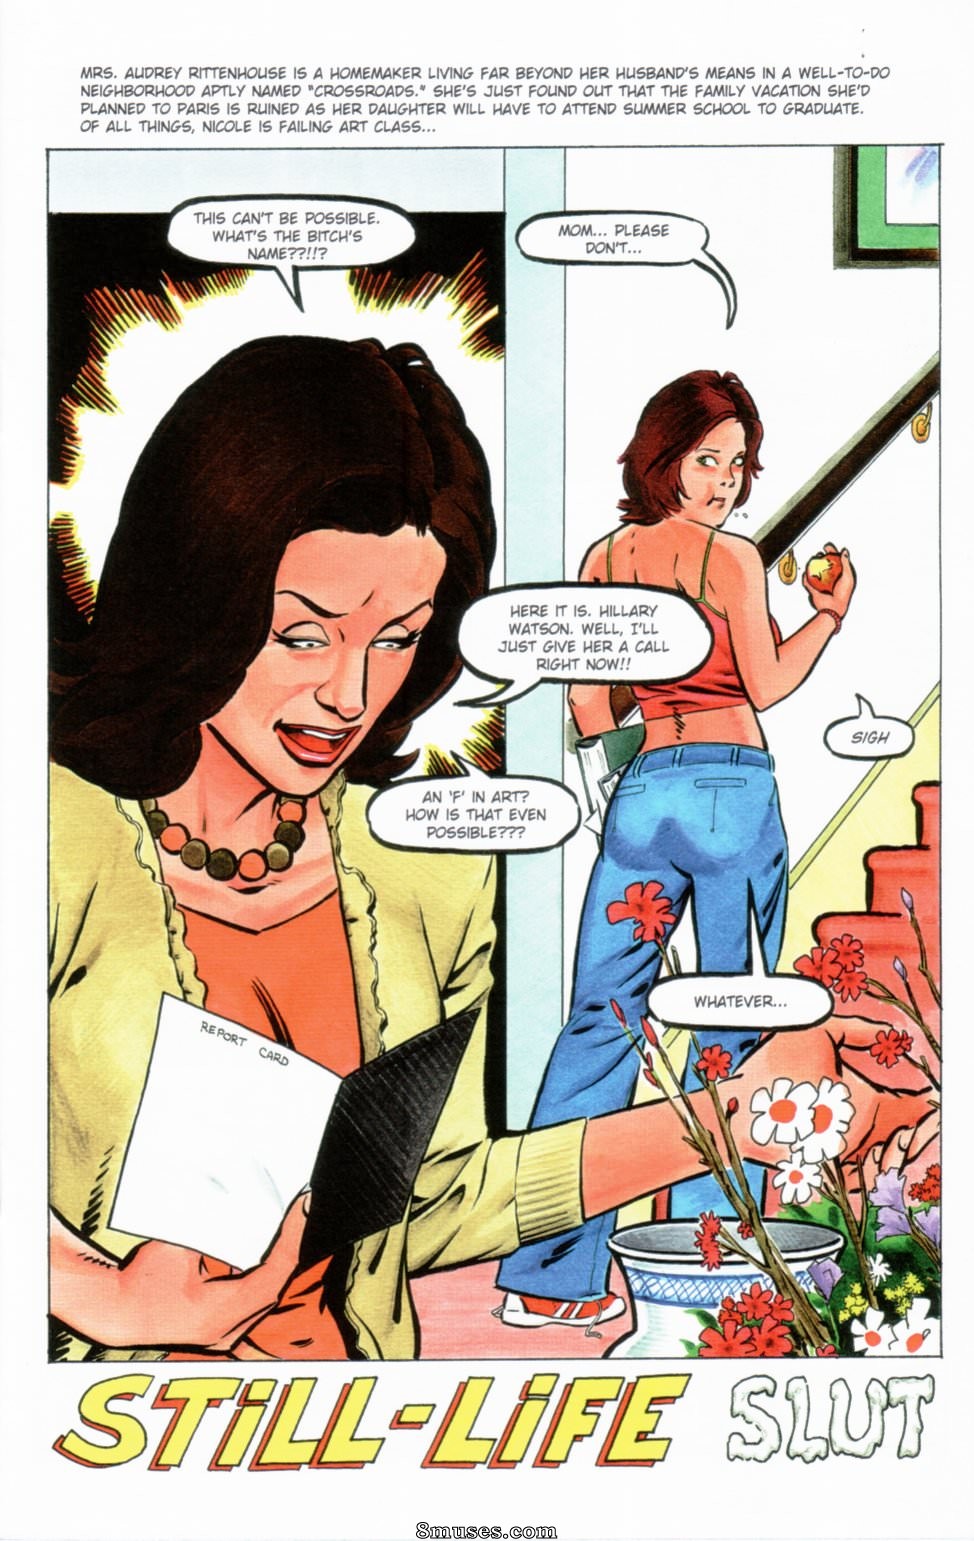 Housewives at Play - The Series Issue 16 - 8muses Comics pic